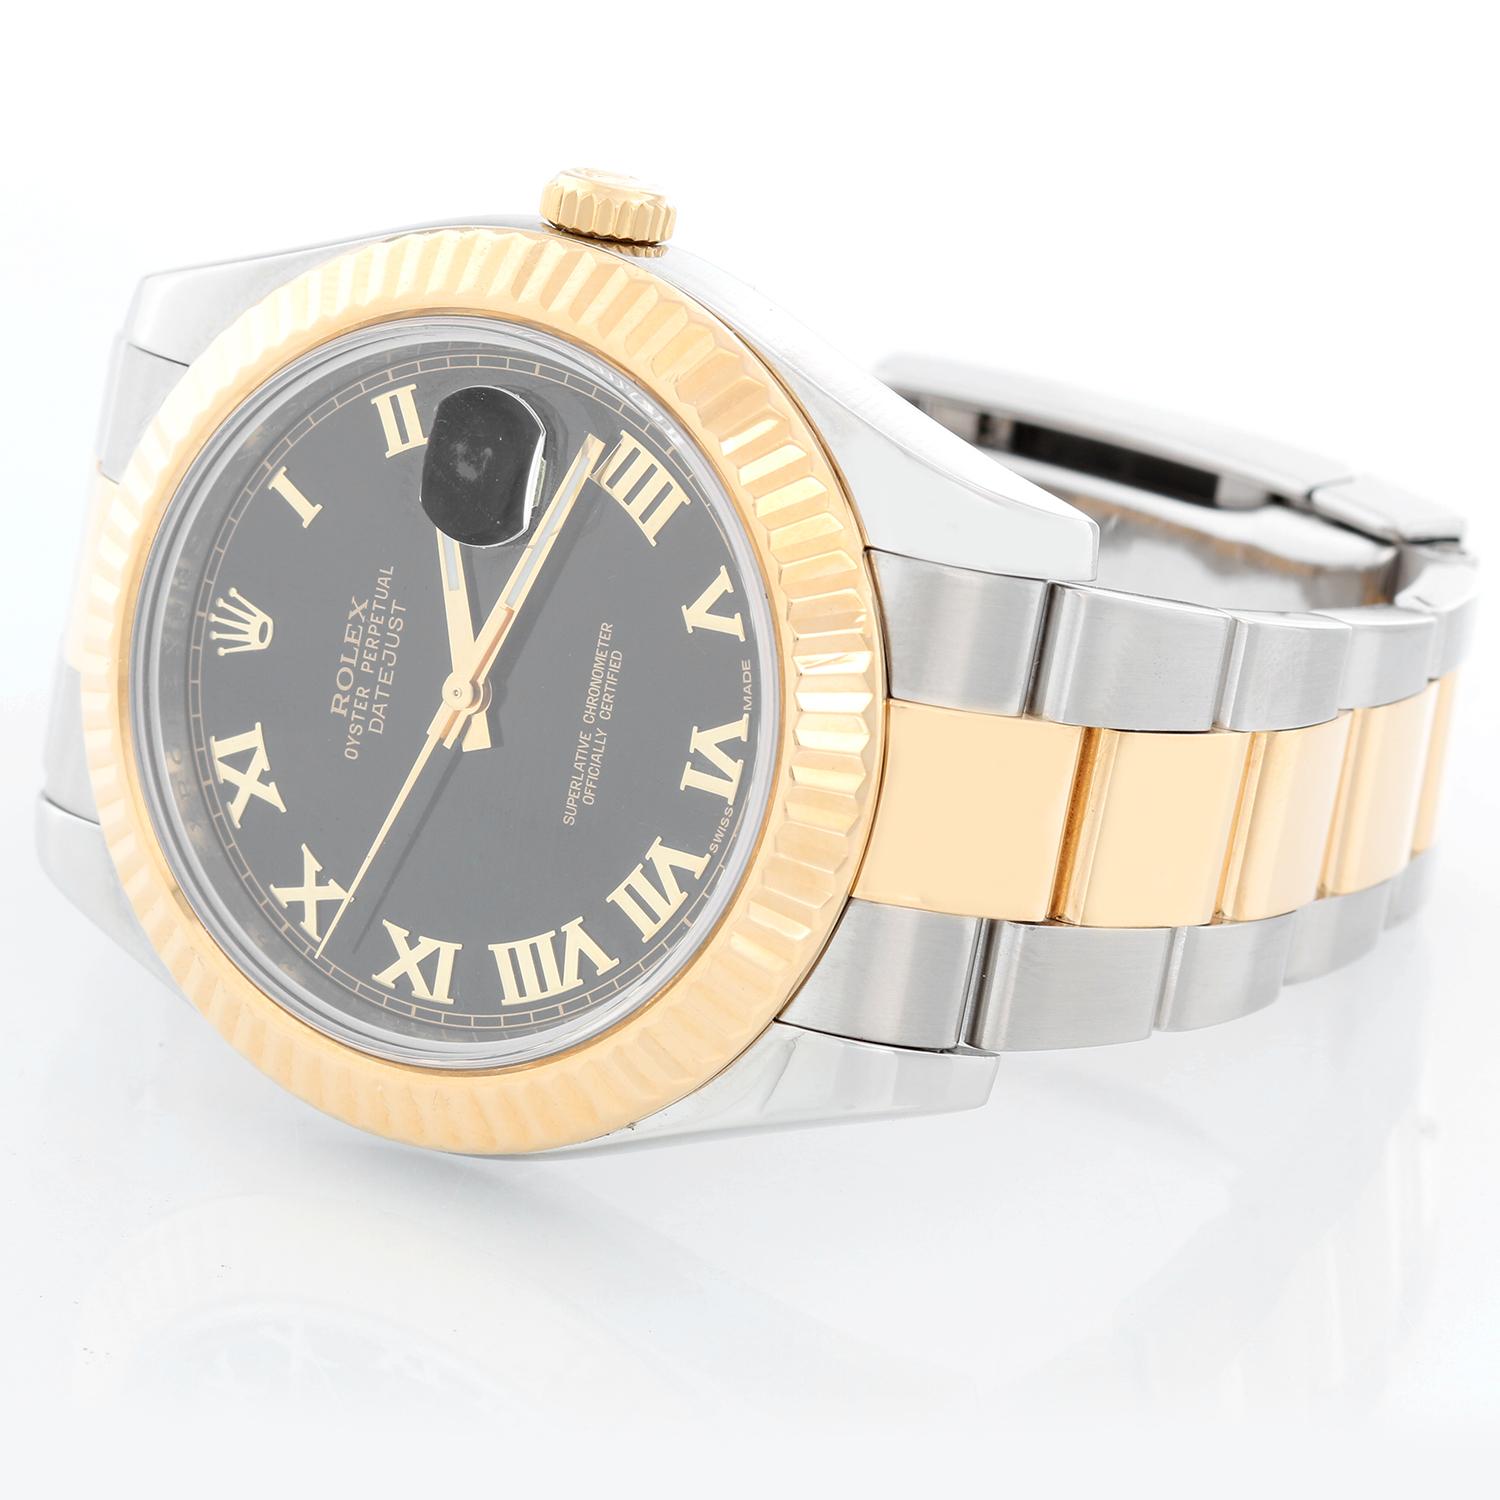 Rolex Datejust II  Men's 2-Tone 41mm Watch 116333 -  Automatic winding, Quickset, sapphire crystal. Stainless steel case with 18k yellow gold fluted bezel  (41mm diameter). Black dial with Roman numerals. Stainless steel and 18k yellow gold Oyster